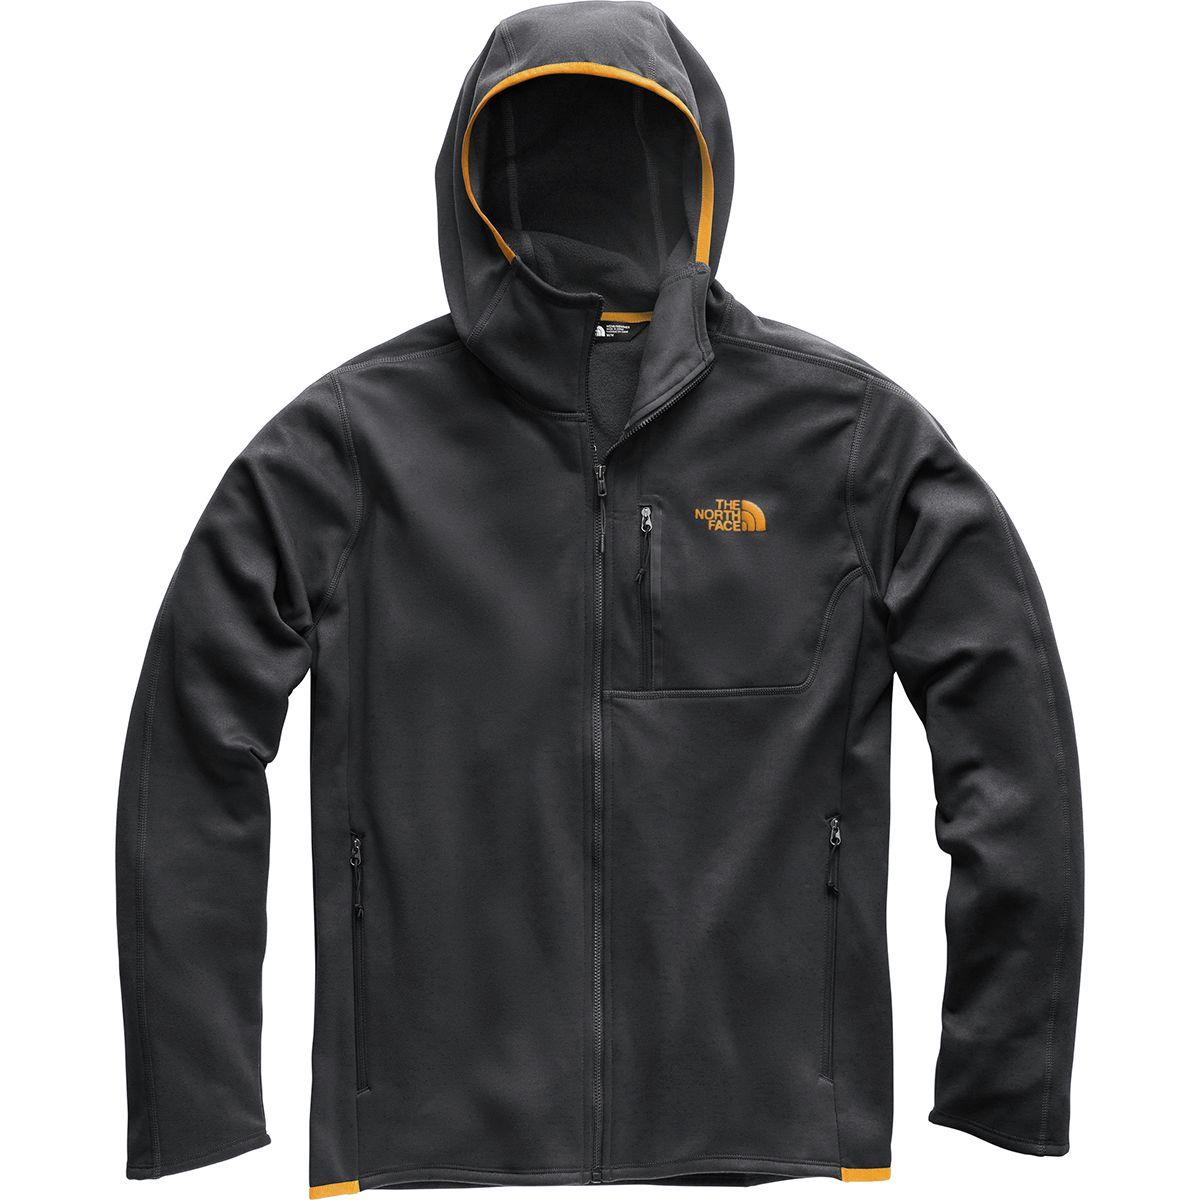 Download The North Face Canyonlands Hooded Fleece Jacket in Gray ...